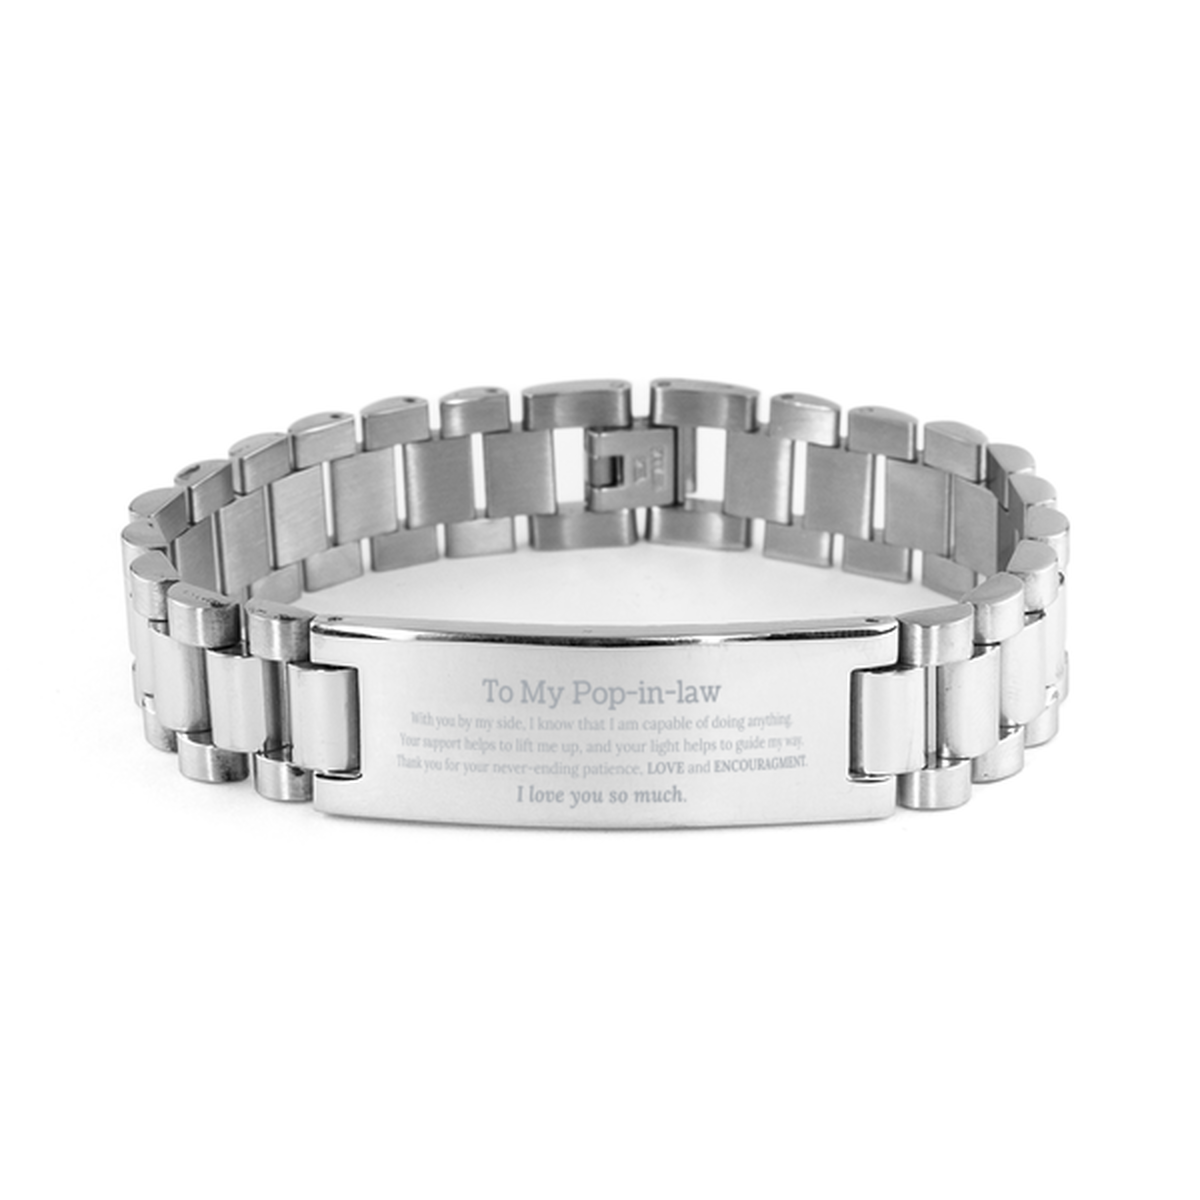 Appreciation Pop-in-law Ladder Stainless Steel Bracelet Gifts, To My Pop-in-law Birthday Christmas Wedding Keepsake Gifts for Pop-in-law With you by my side, I know that I am capable of doing anything. I love you so much